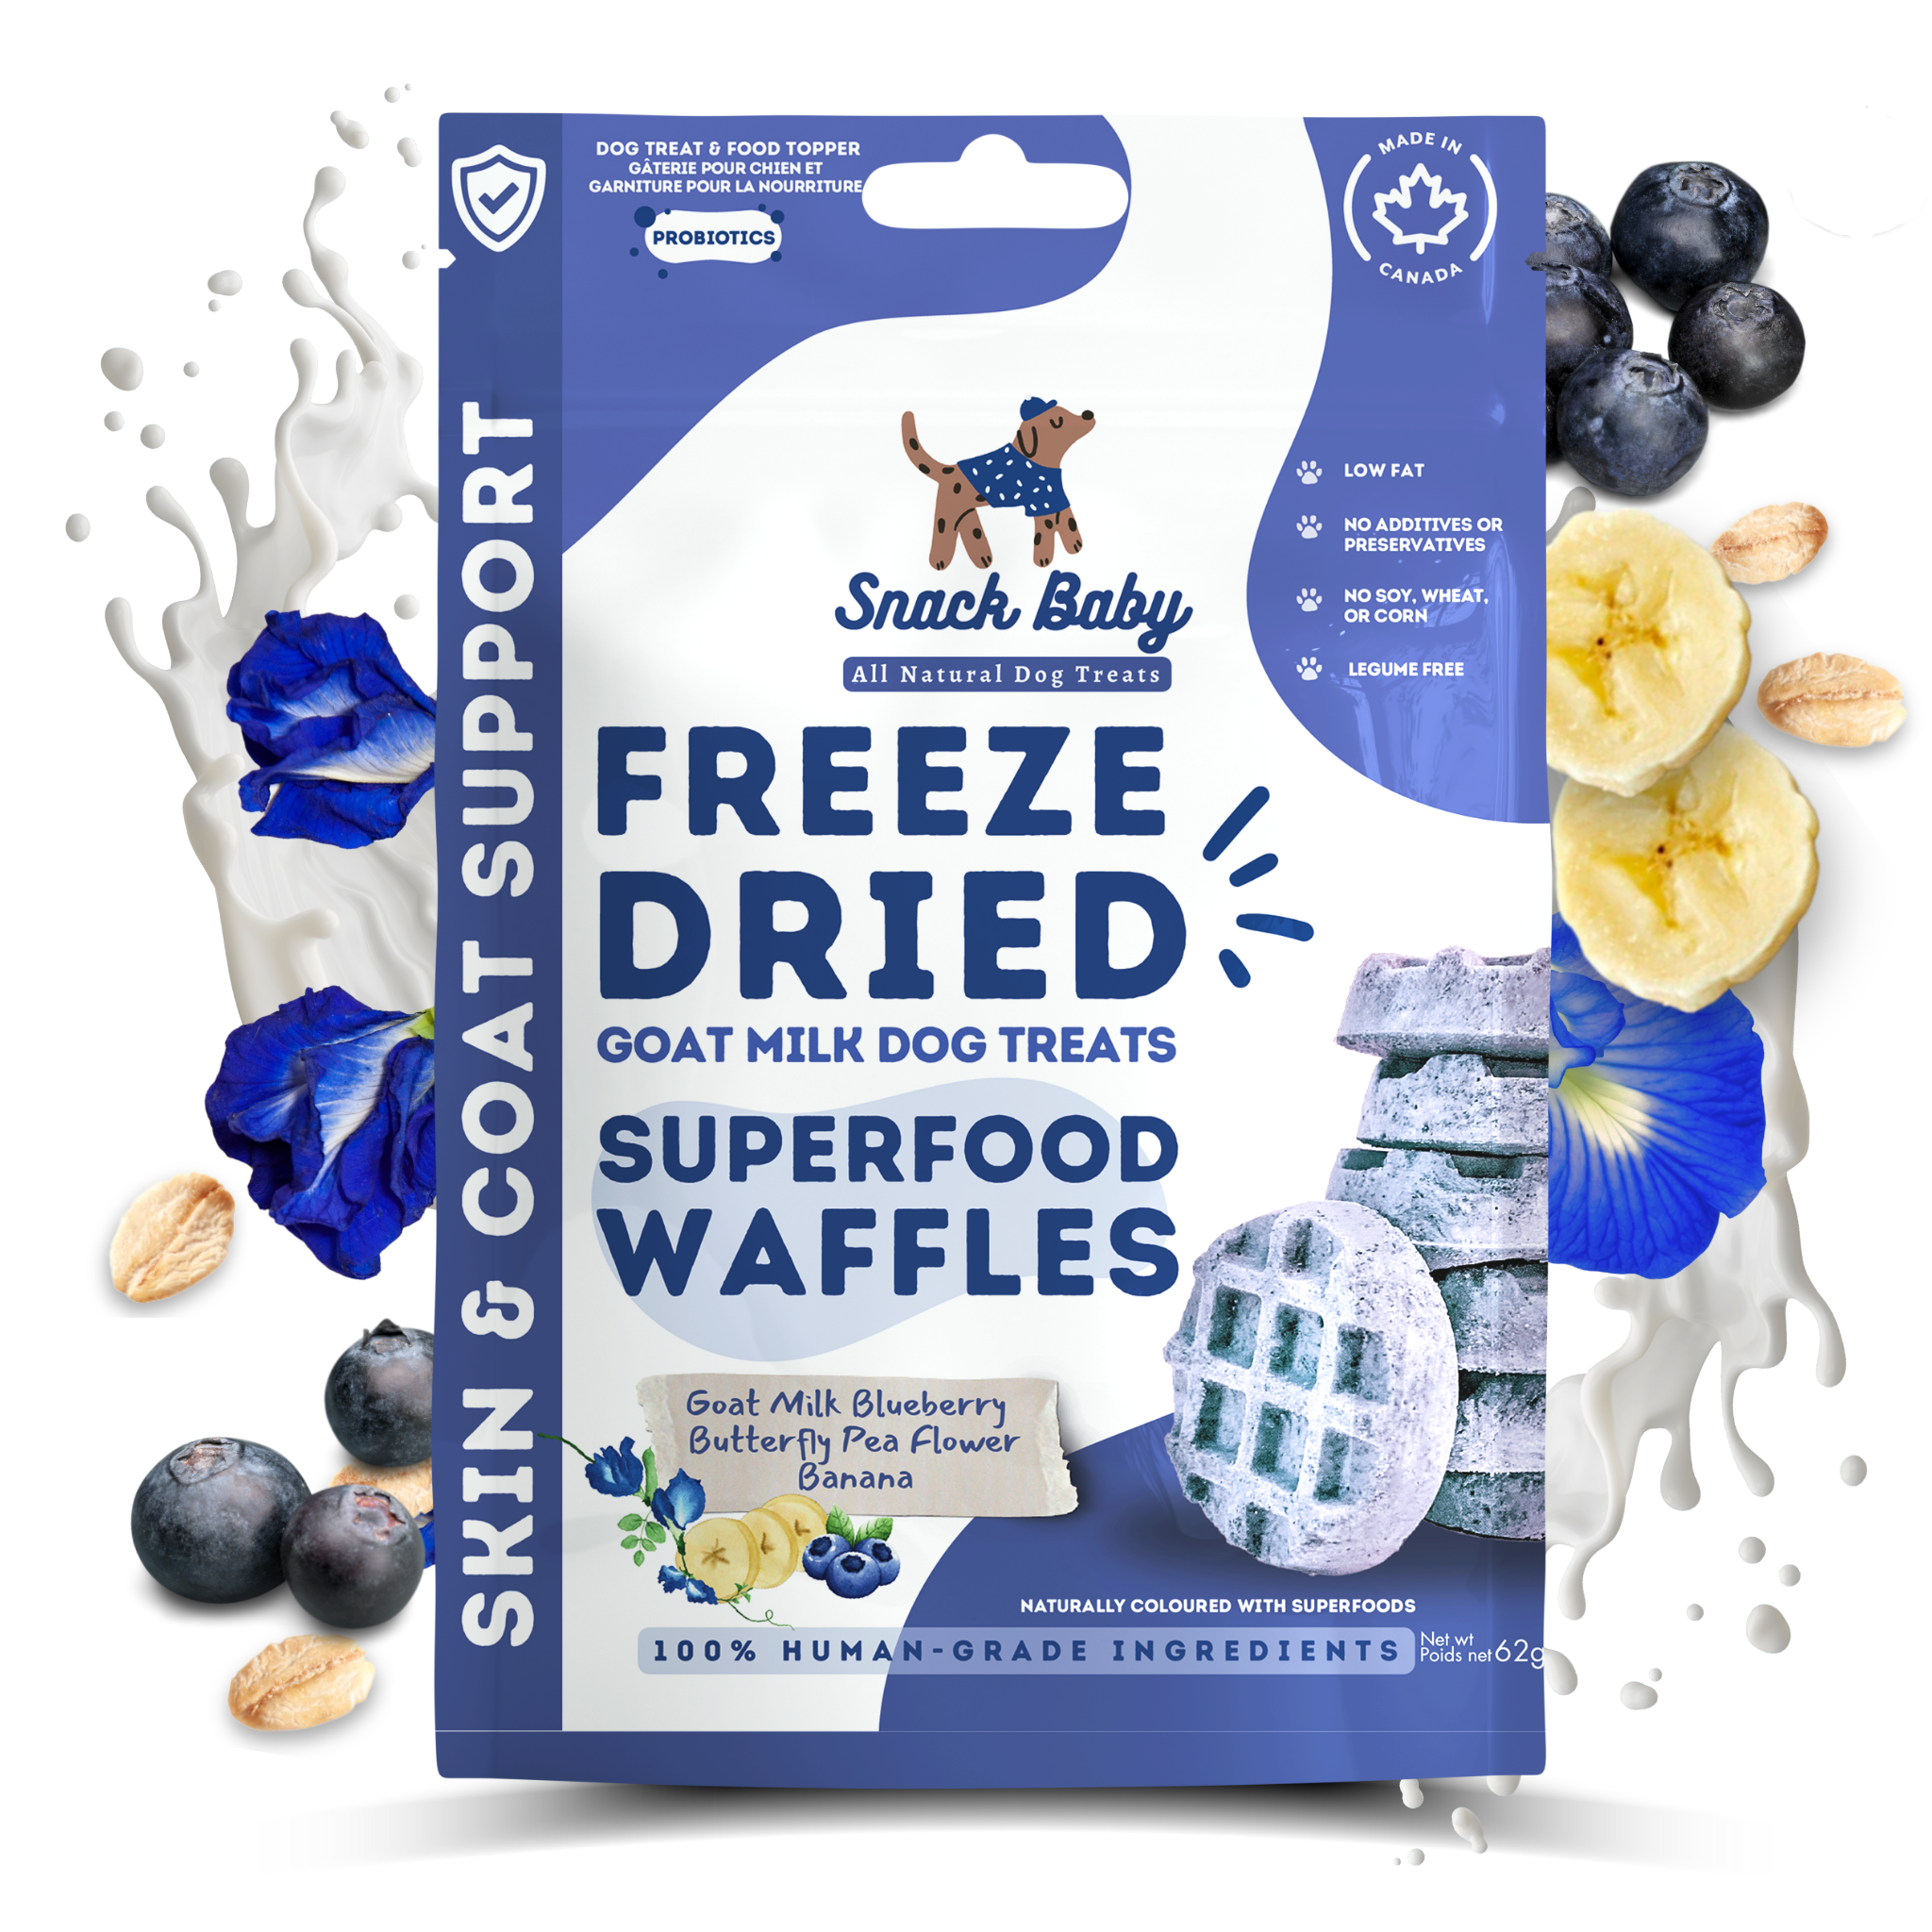 Snack Baby's Superfood Waffles with Blueberry all natural dog treats